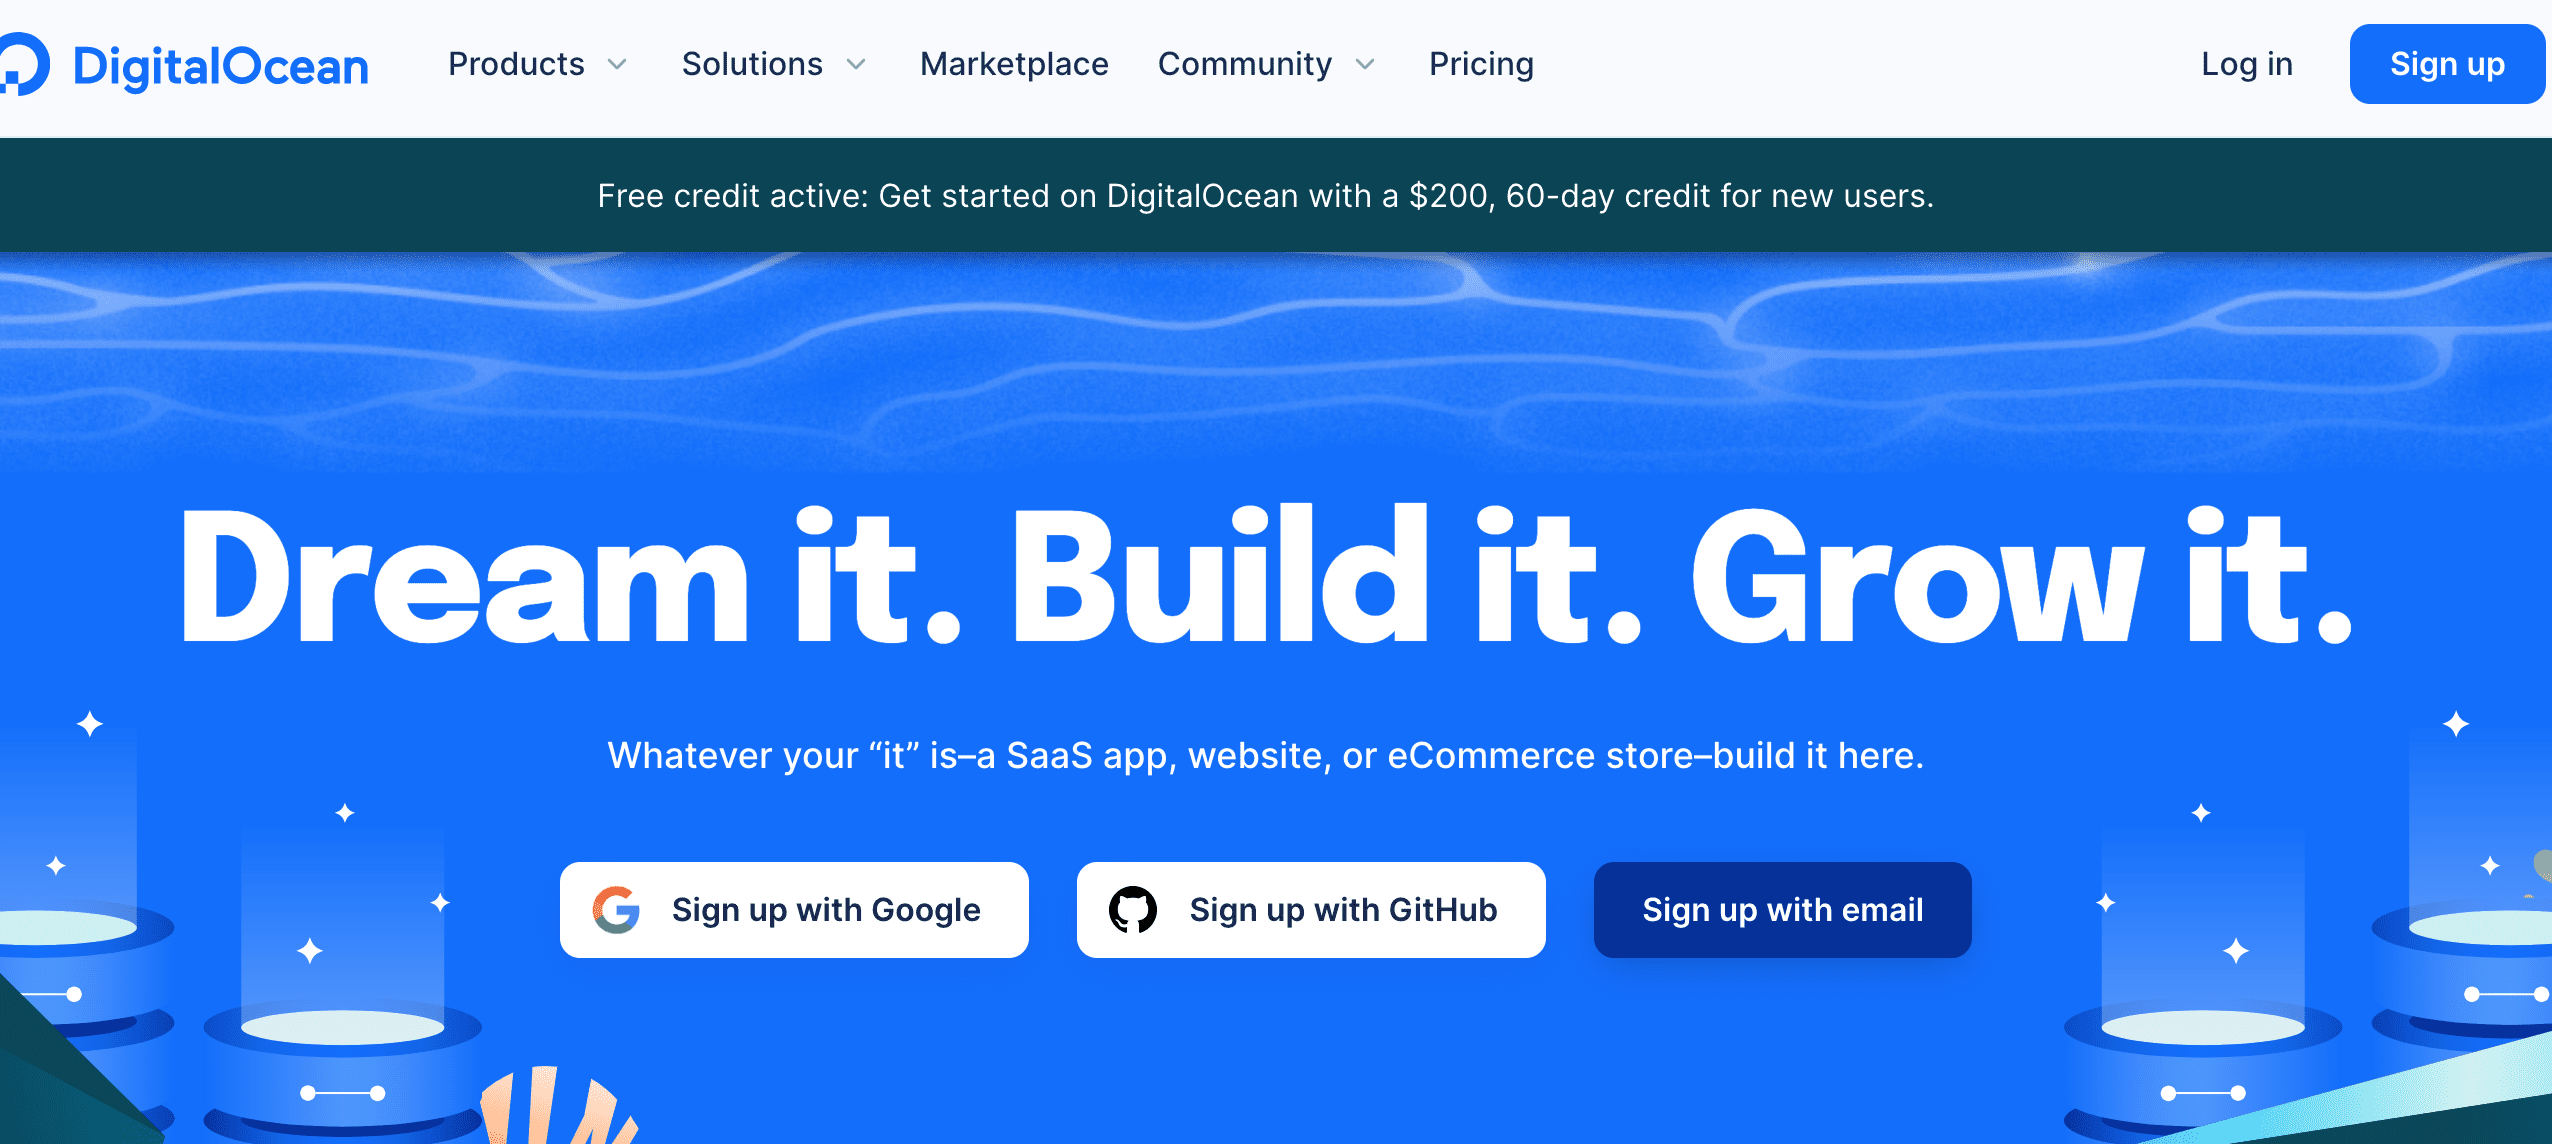 Features and Functions of digitalocean